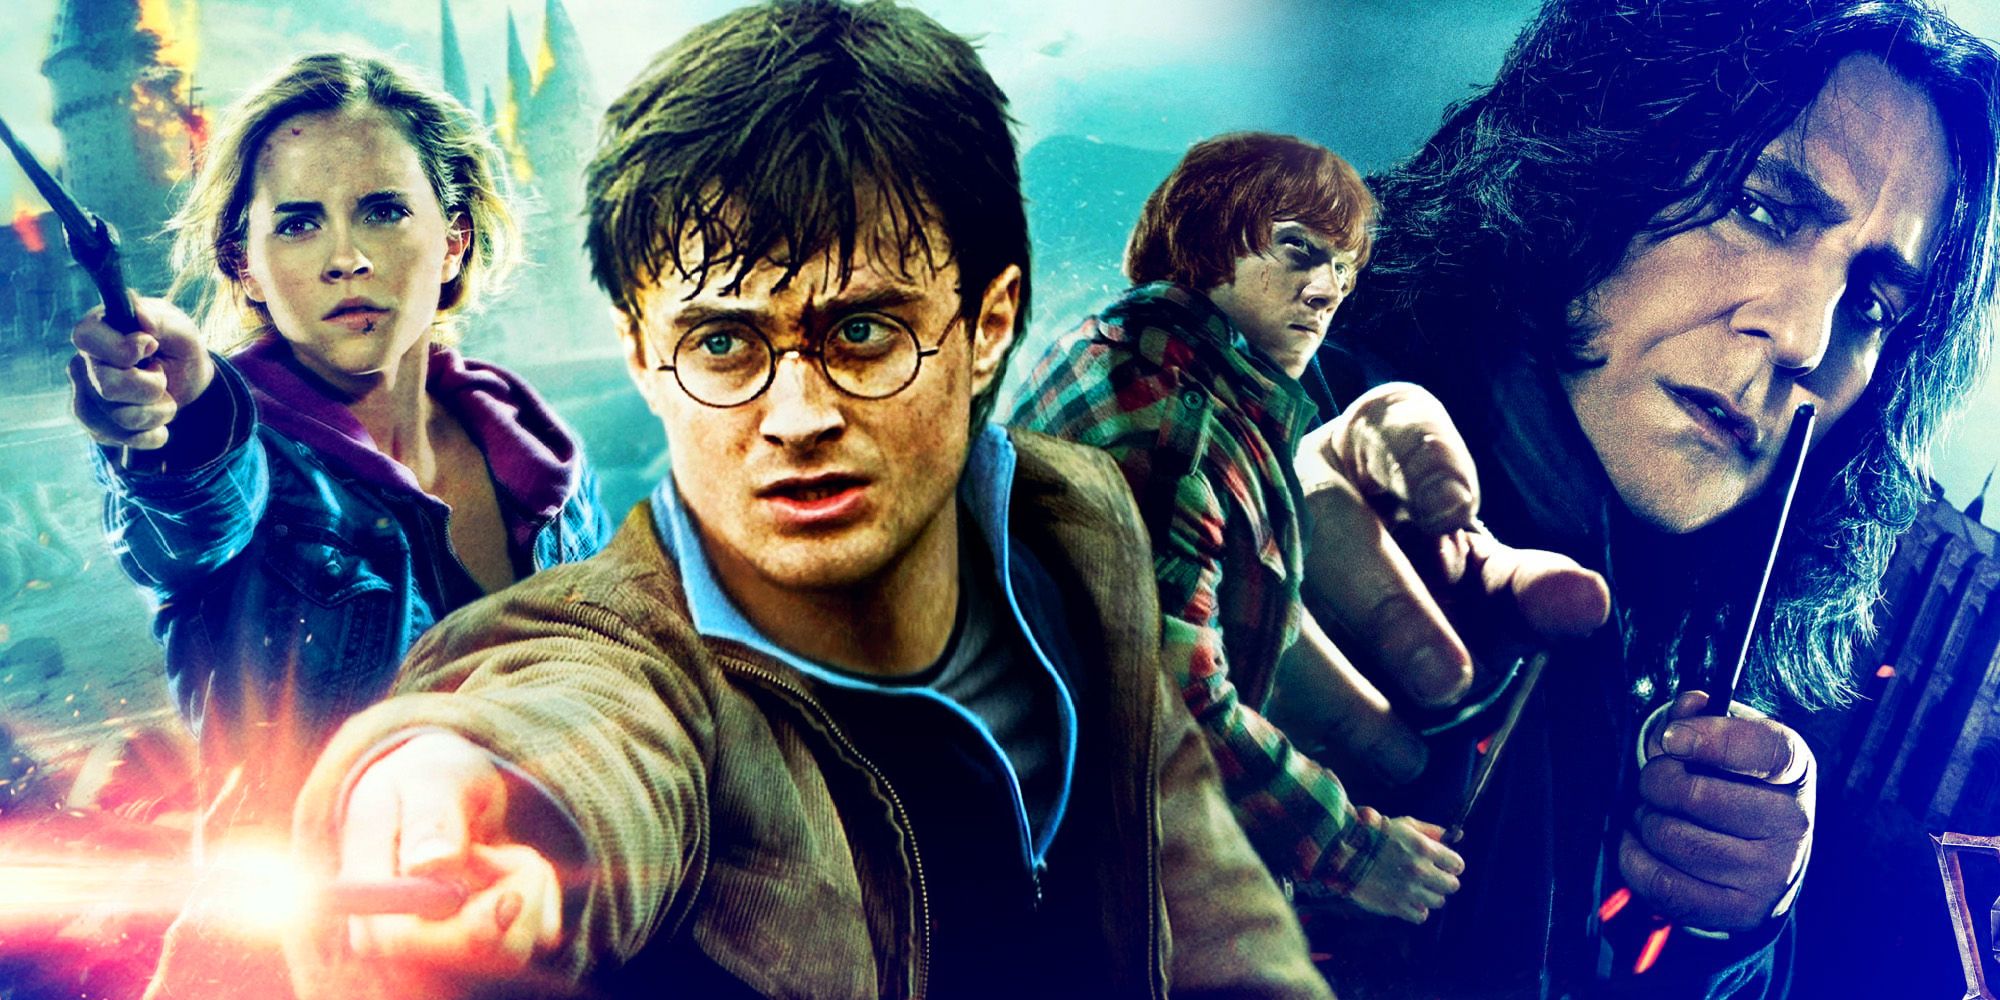 A blended image features Hermione, Harry, Ron, and Snape in the Harry Potter movie franchise